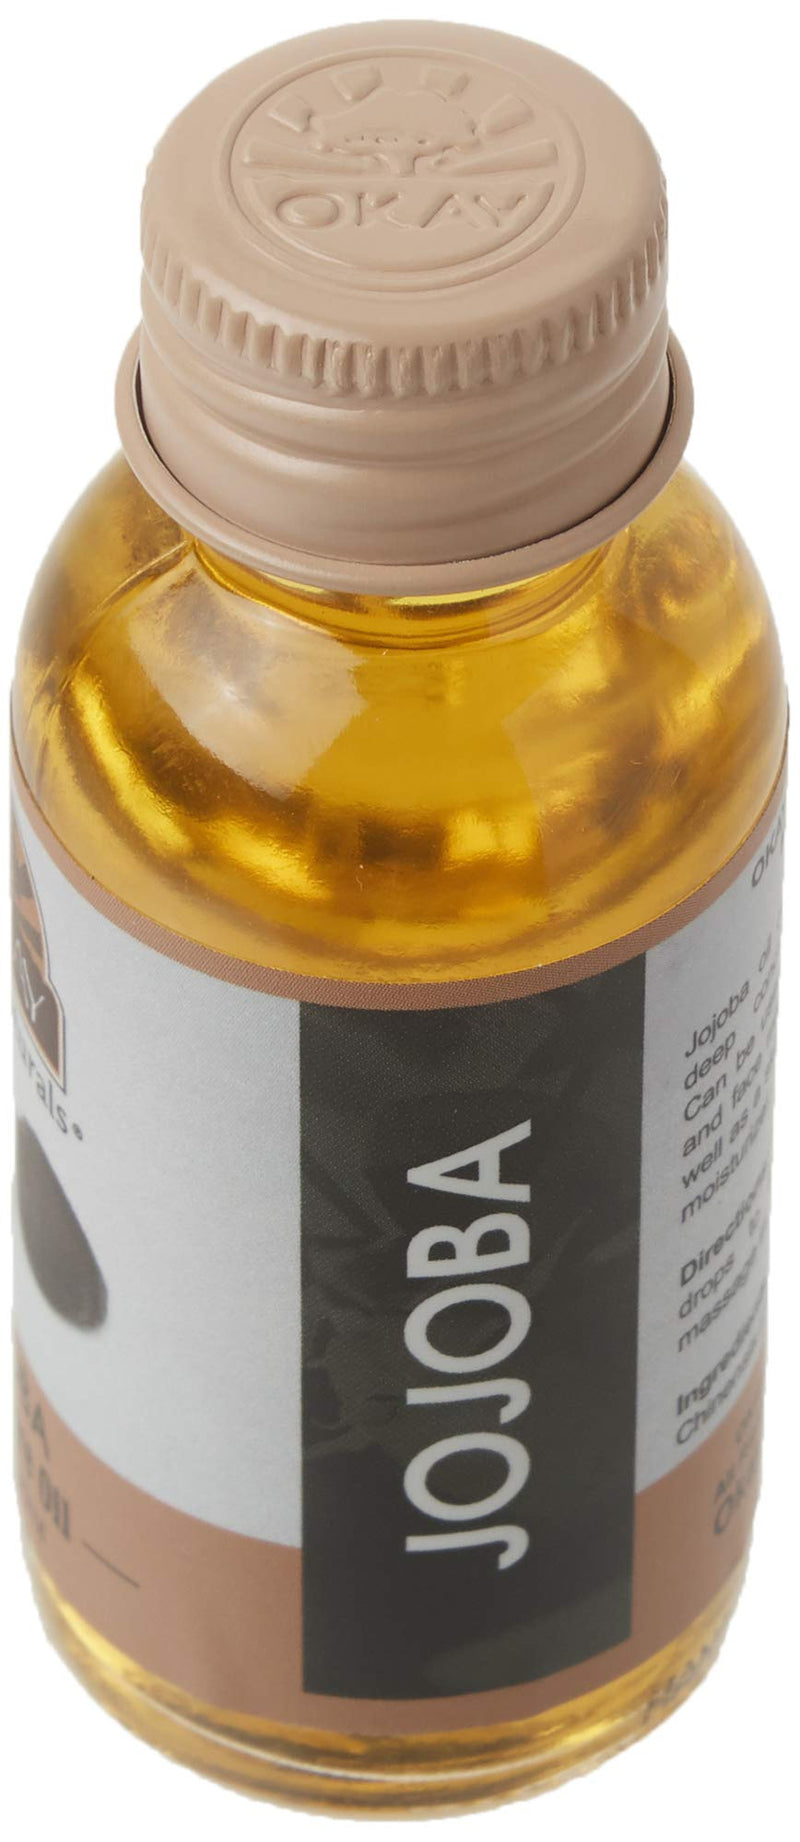 OKAY | Jojoba Oil | For Hair and Skin | Deep Conditioning Treatment | 100 % Pure Oil | Free of Paraben, Silicone | 1 oz - BeesActive Australia